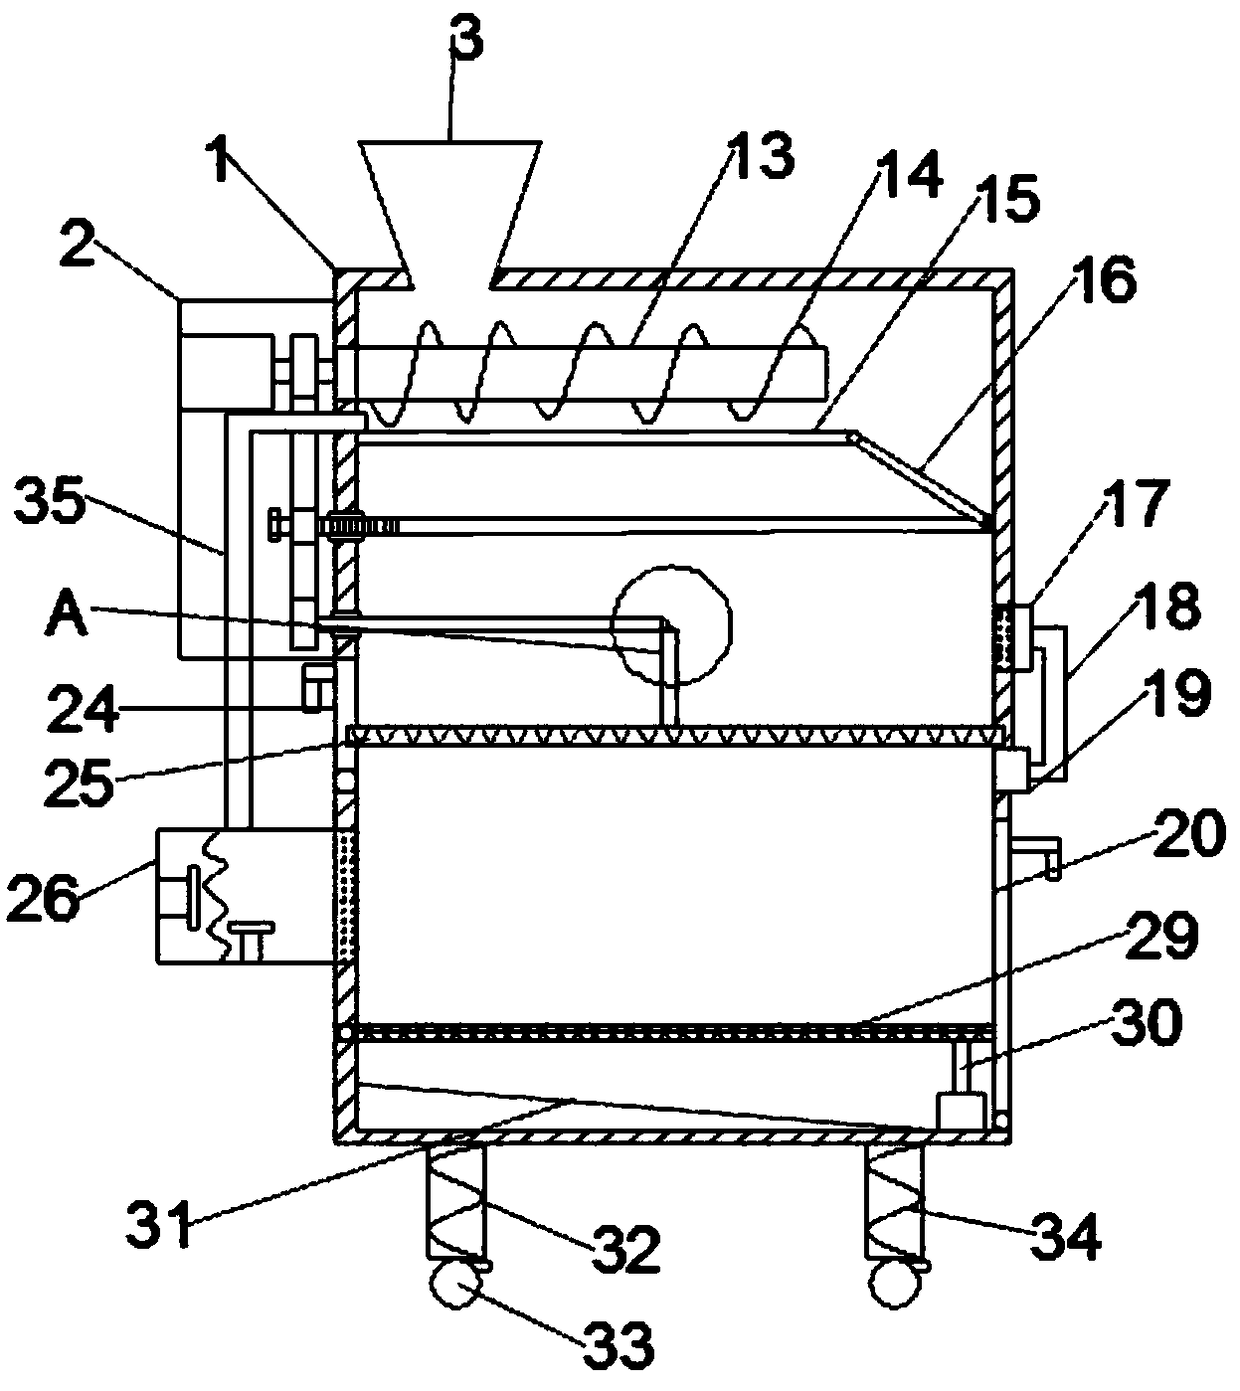 Drying and screening device for agricultural cereals